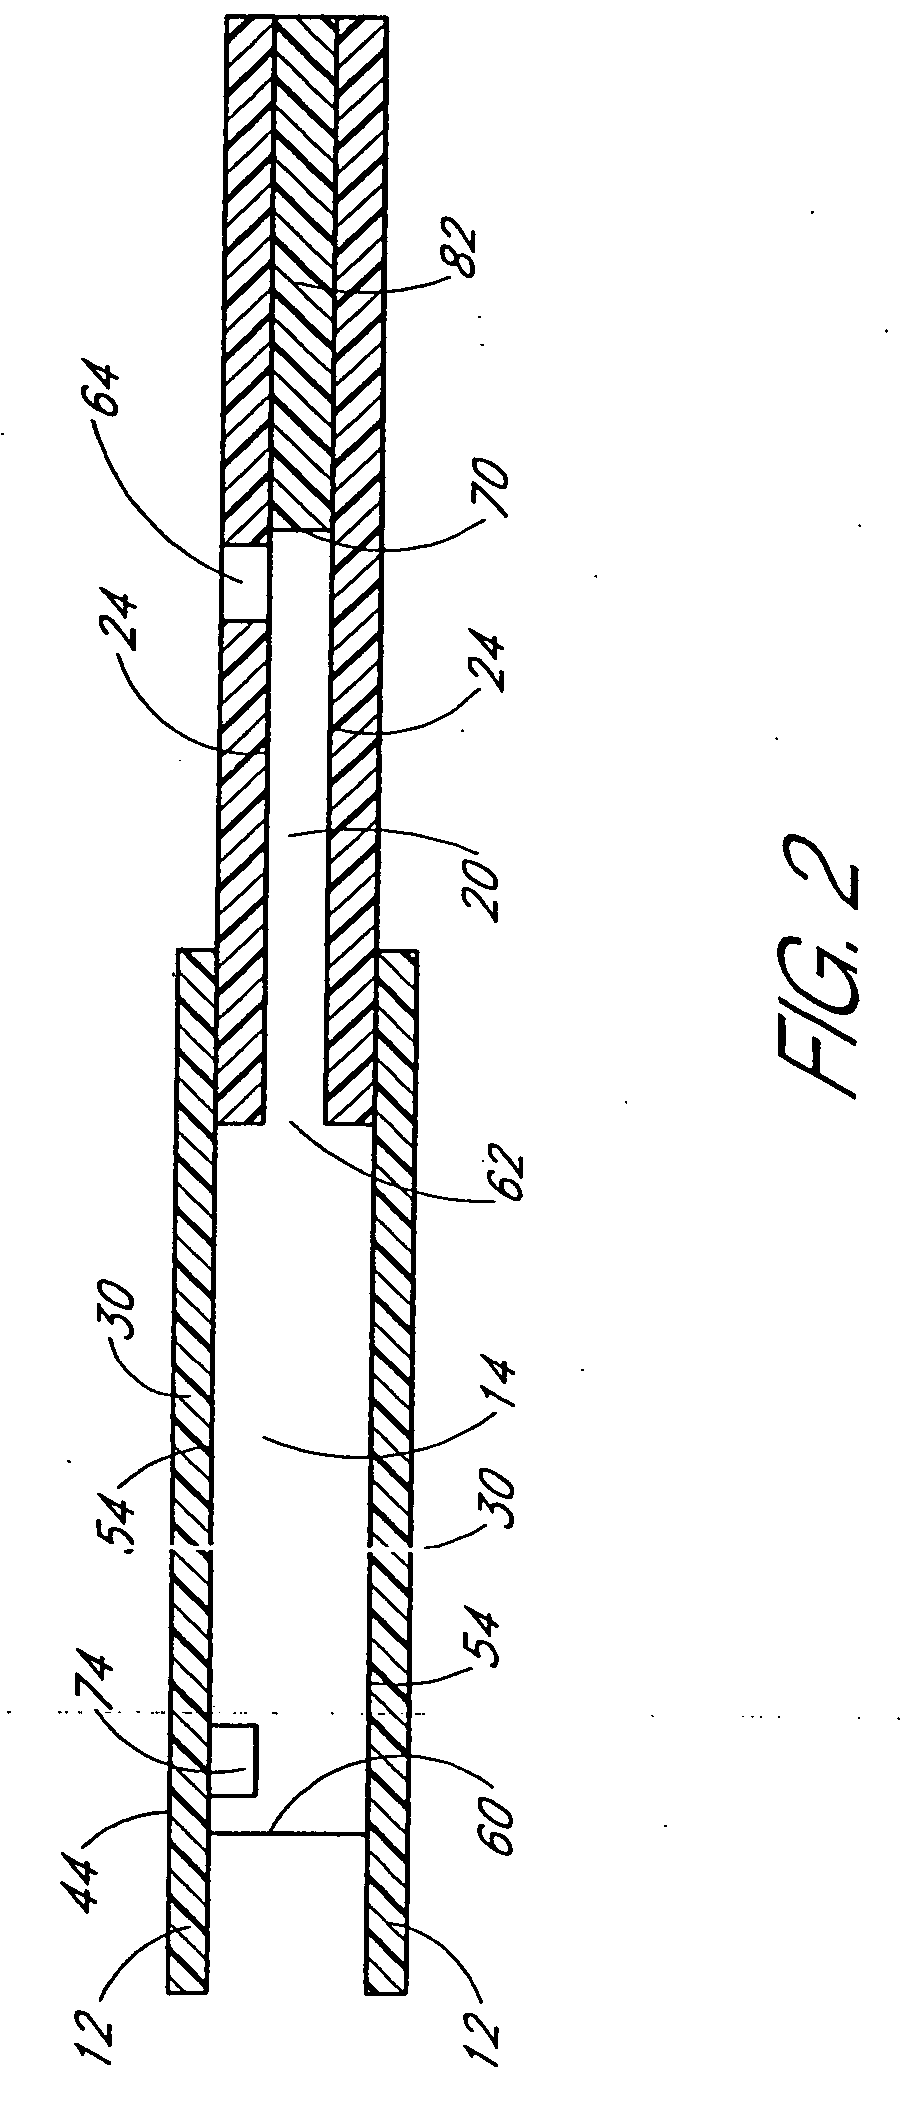 Method and device for sampling and analyzing interstitial fluid and whole blood samples